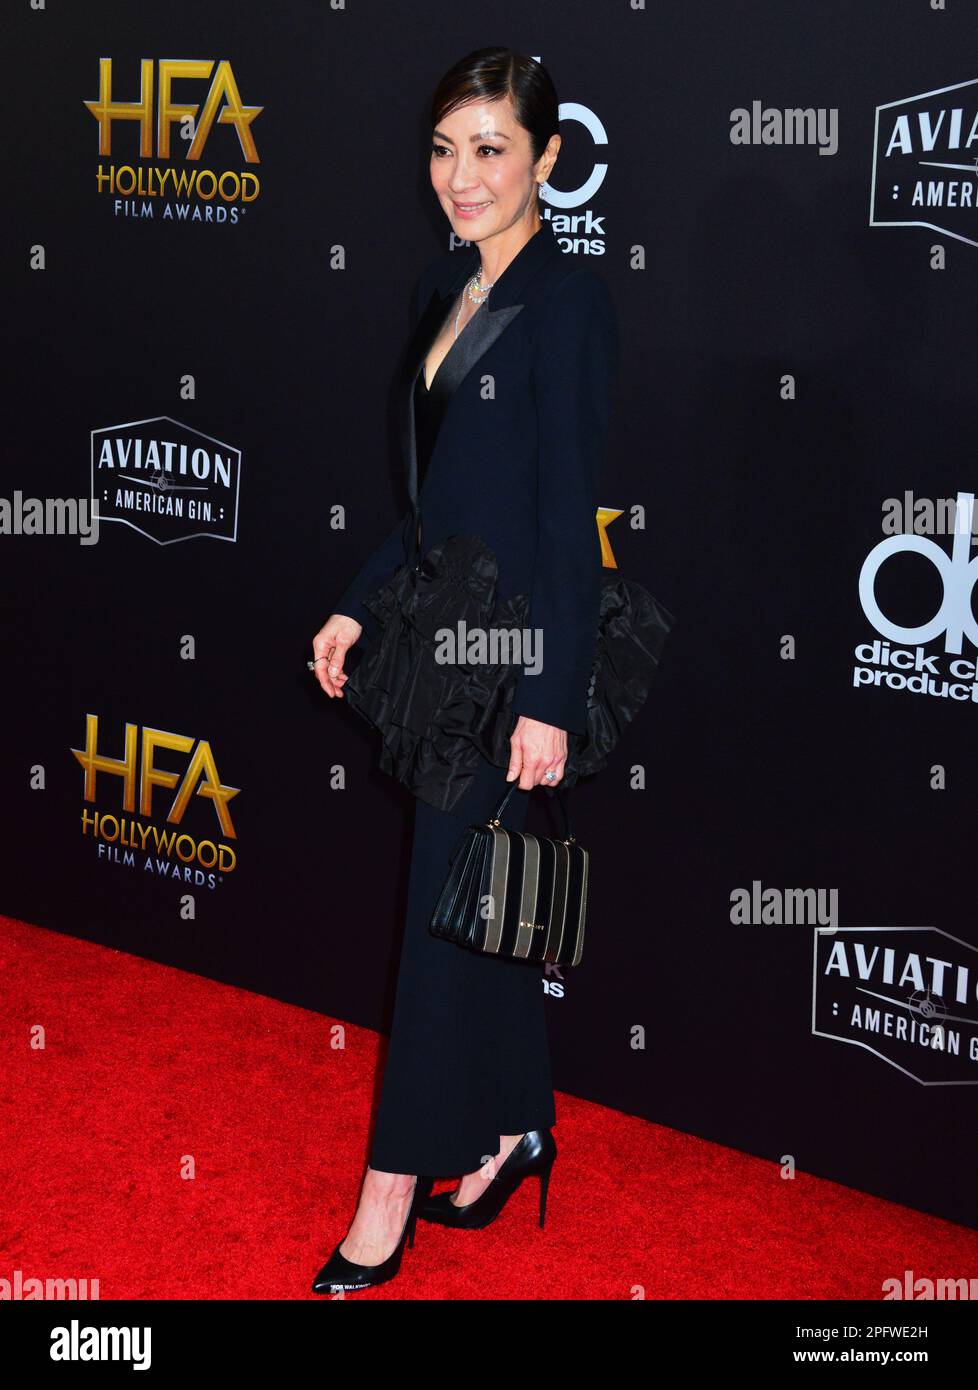 Michelle Yeoh 129 attends the 22nd Annual Hollywood Film Awards at The Beverly Hilton Hotel on November 4, 2018 in Beverly Hills, California.Richard Belzer, Comedian and Law & Order- SVU Mainstay, Dead at 78    © Tsuni / USA Michelle Yeoh 129 Stock Photo